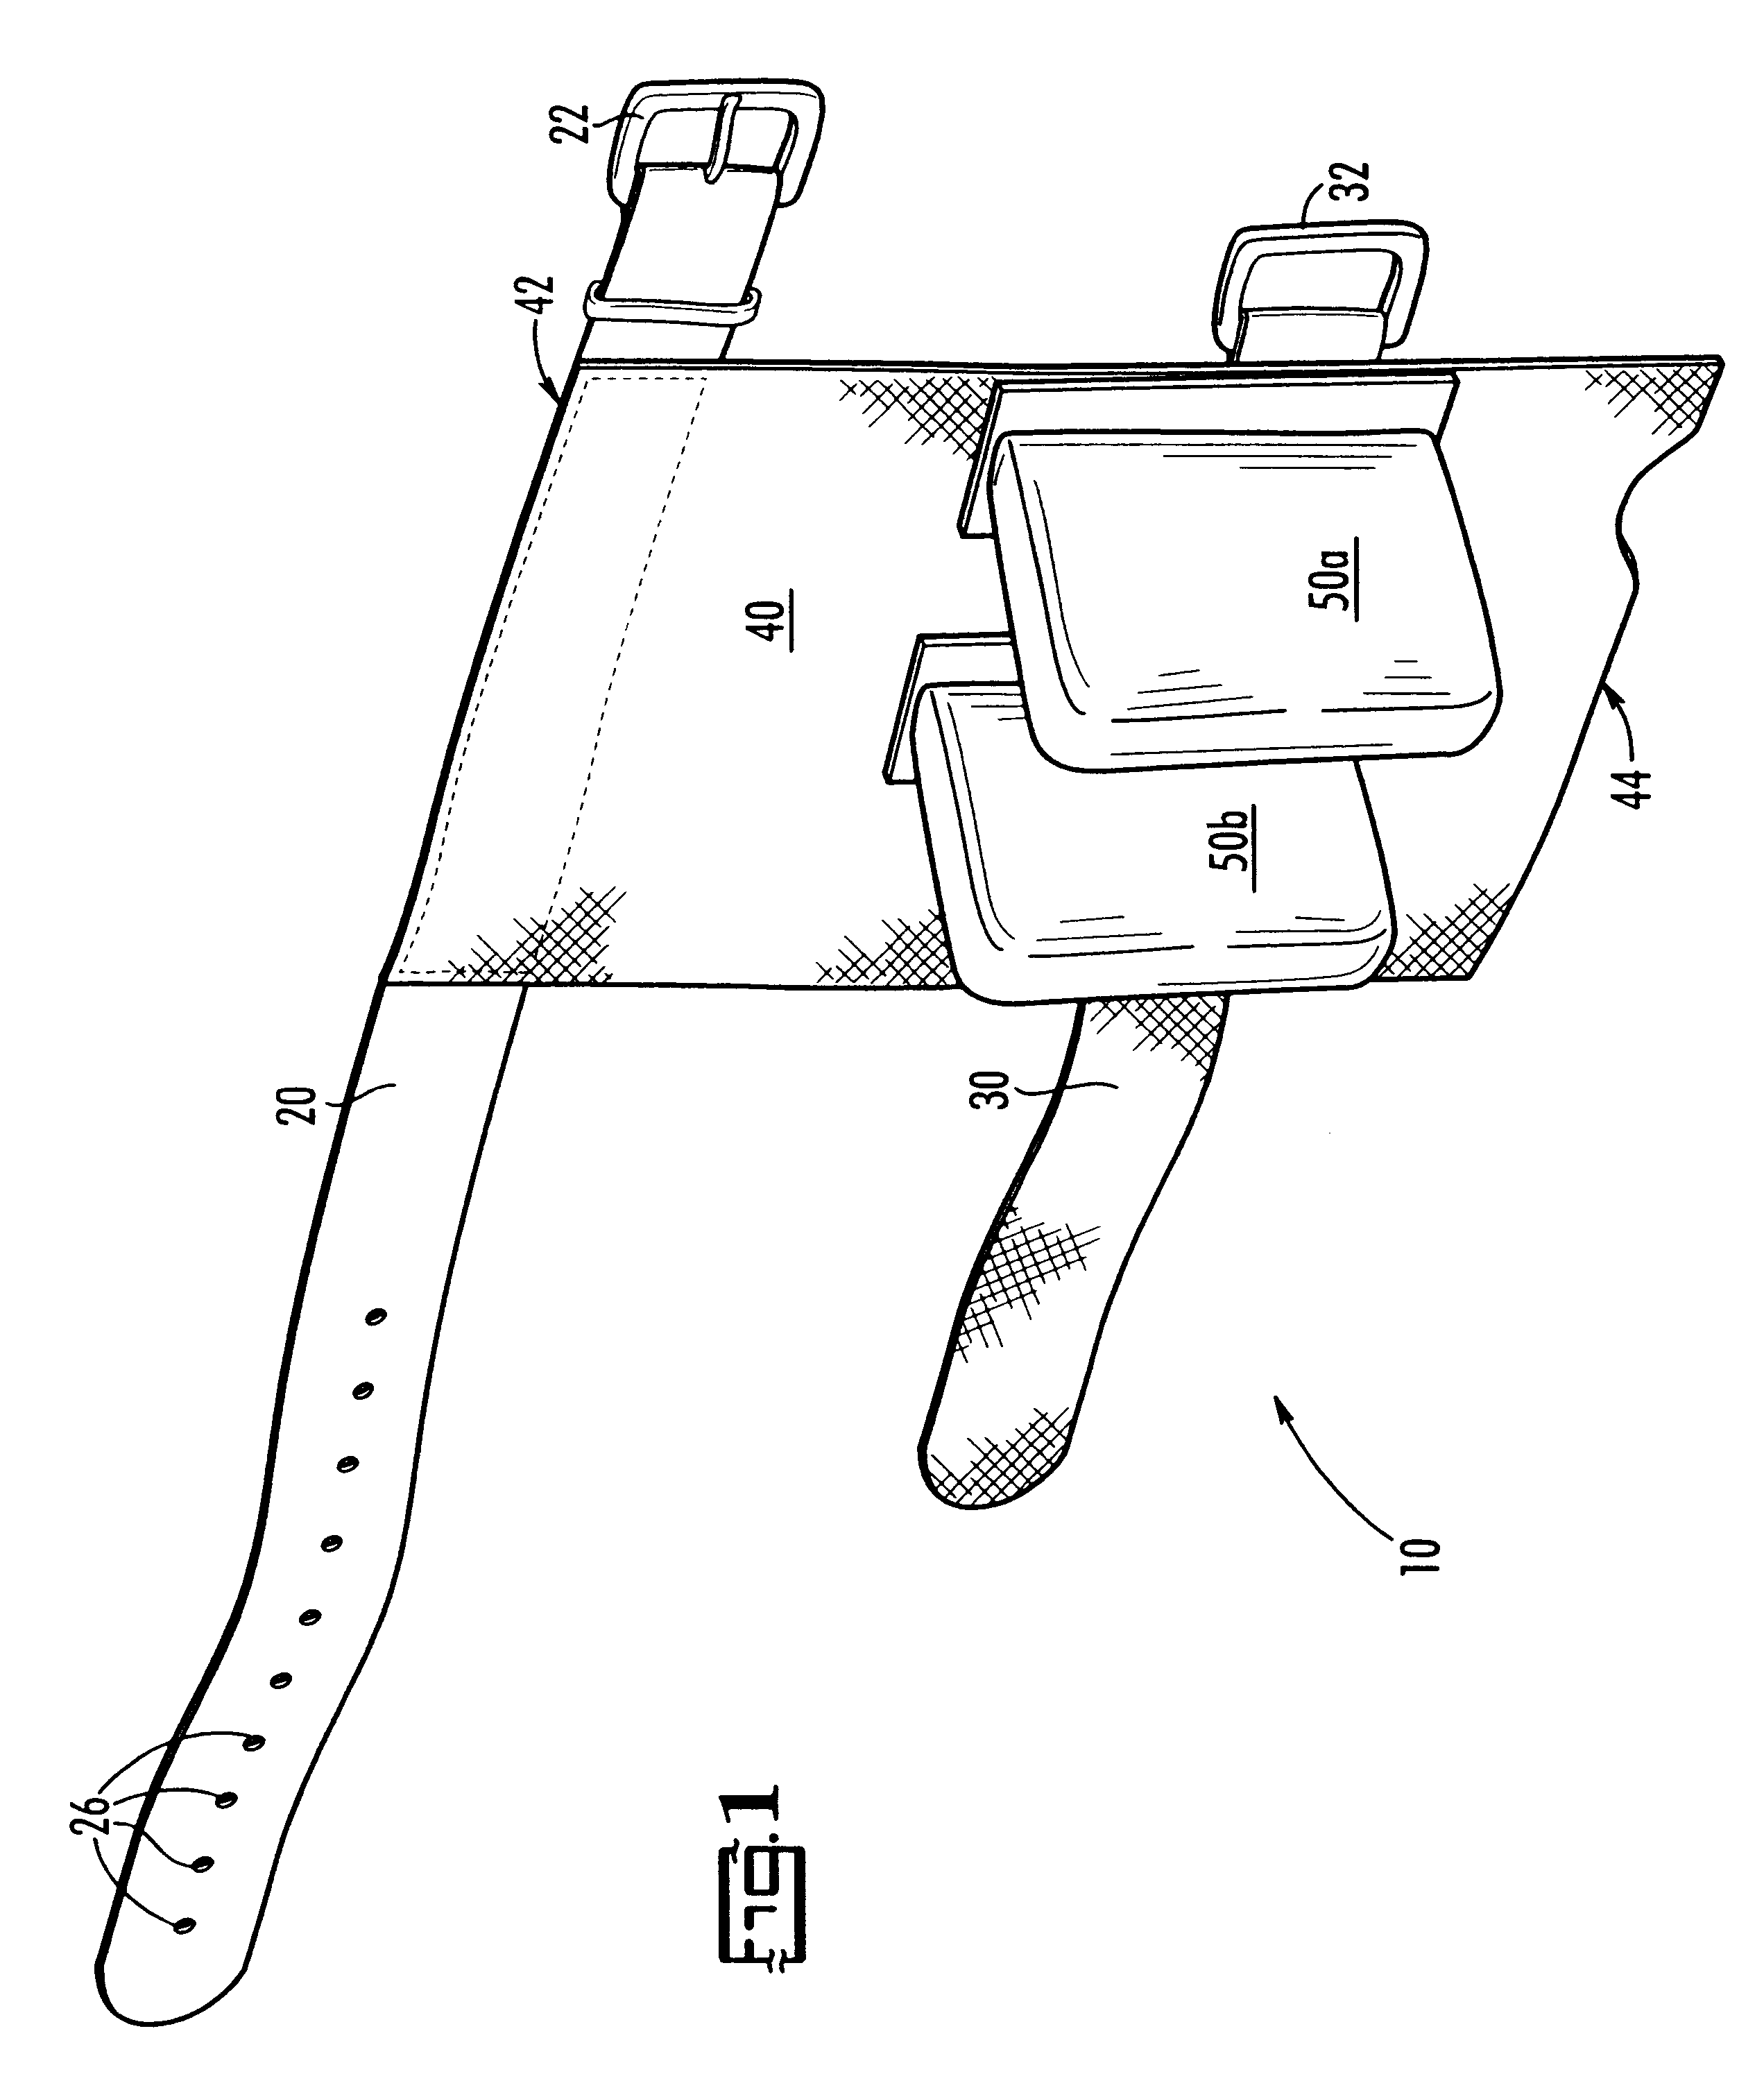 Golf training aid and method of use